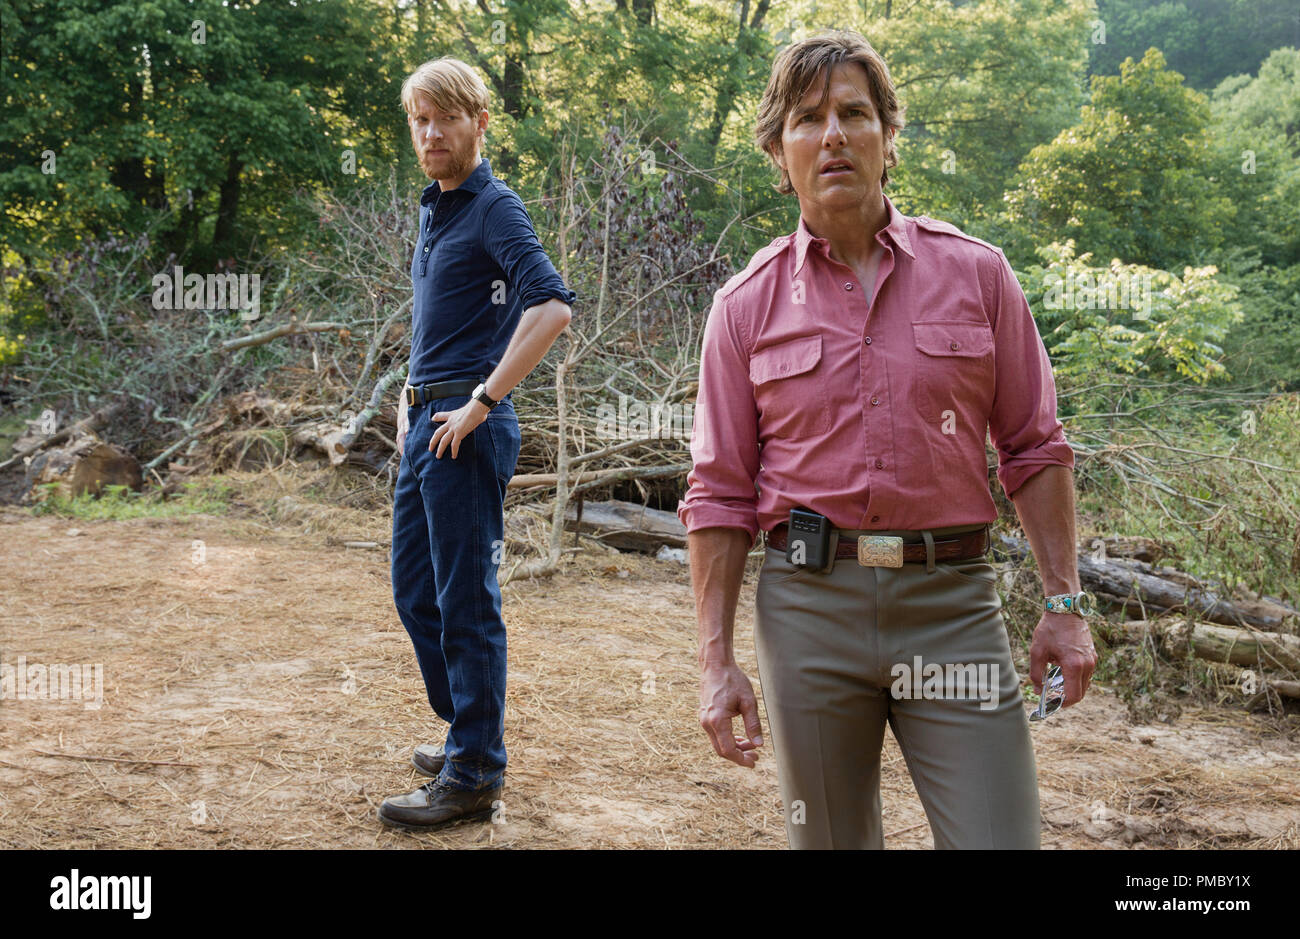 (L to R) Monty Schafer (DOMHNALL GLEESON) and Barry Seal (TOM CRUISE) in Universal Pictures' 'American Made.' (2017) Stock Photo